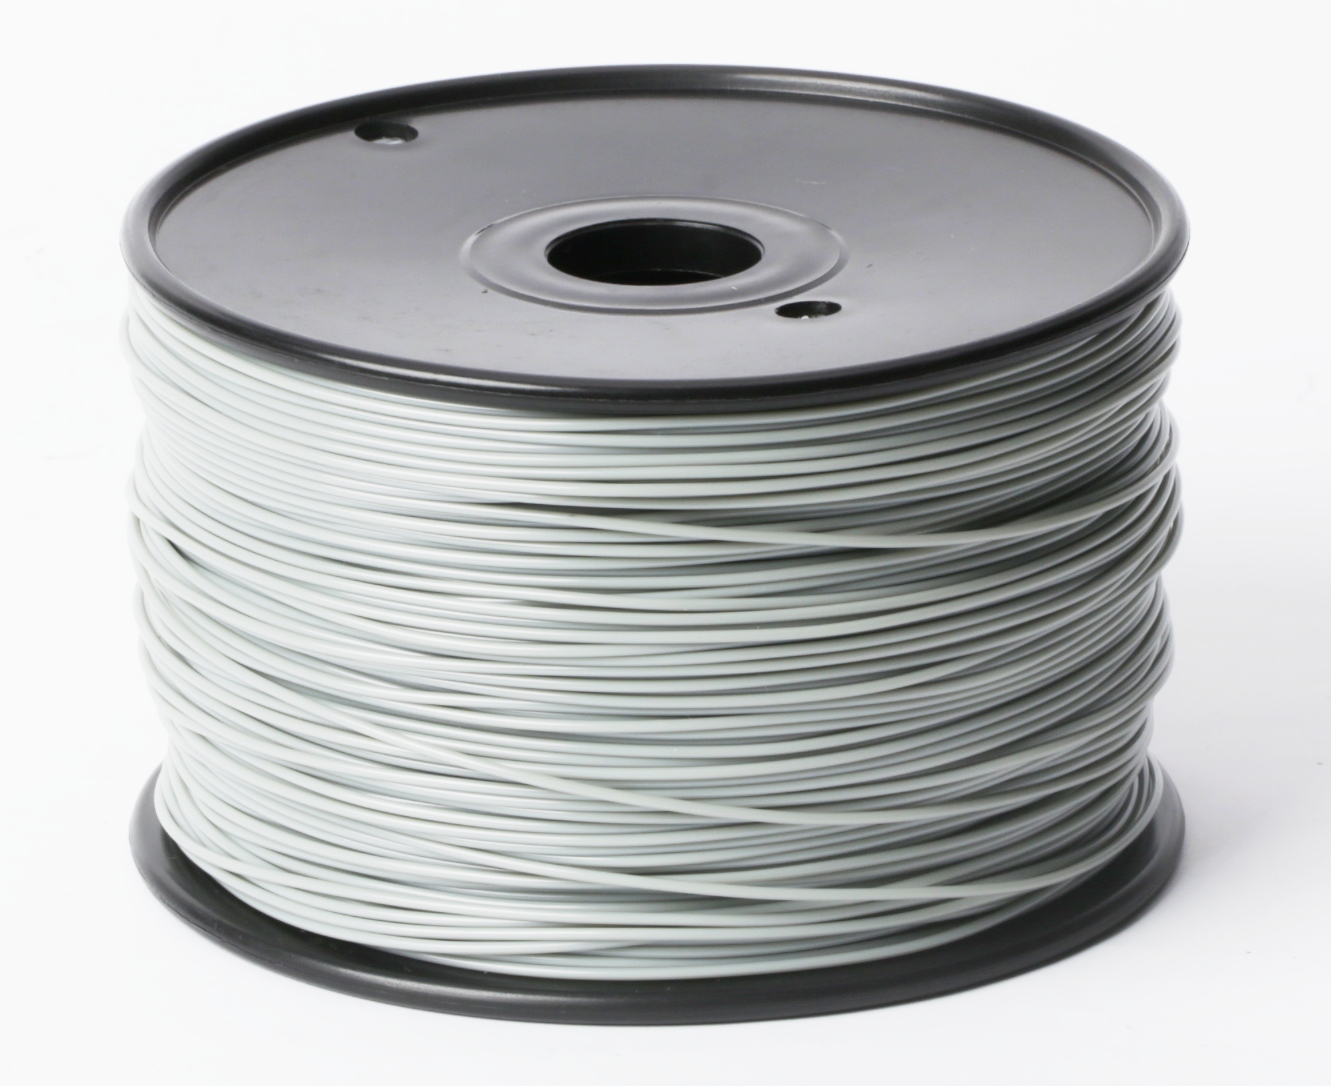 ABS Glow Green filament 1.75mm 1kg/spool for 3D Printer